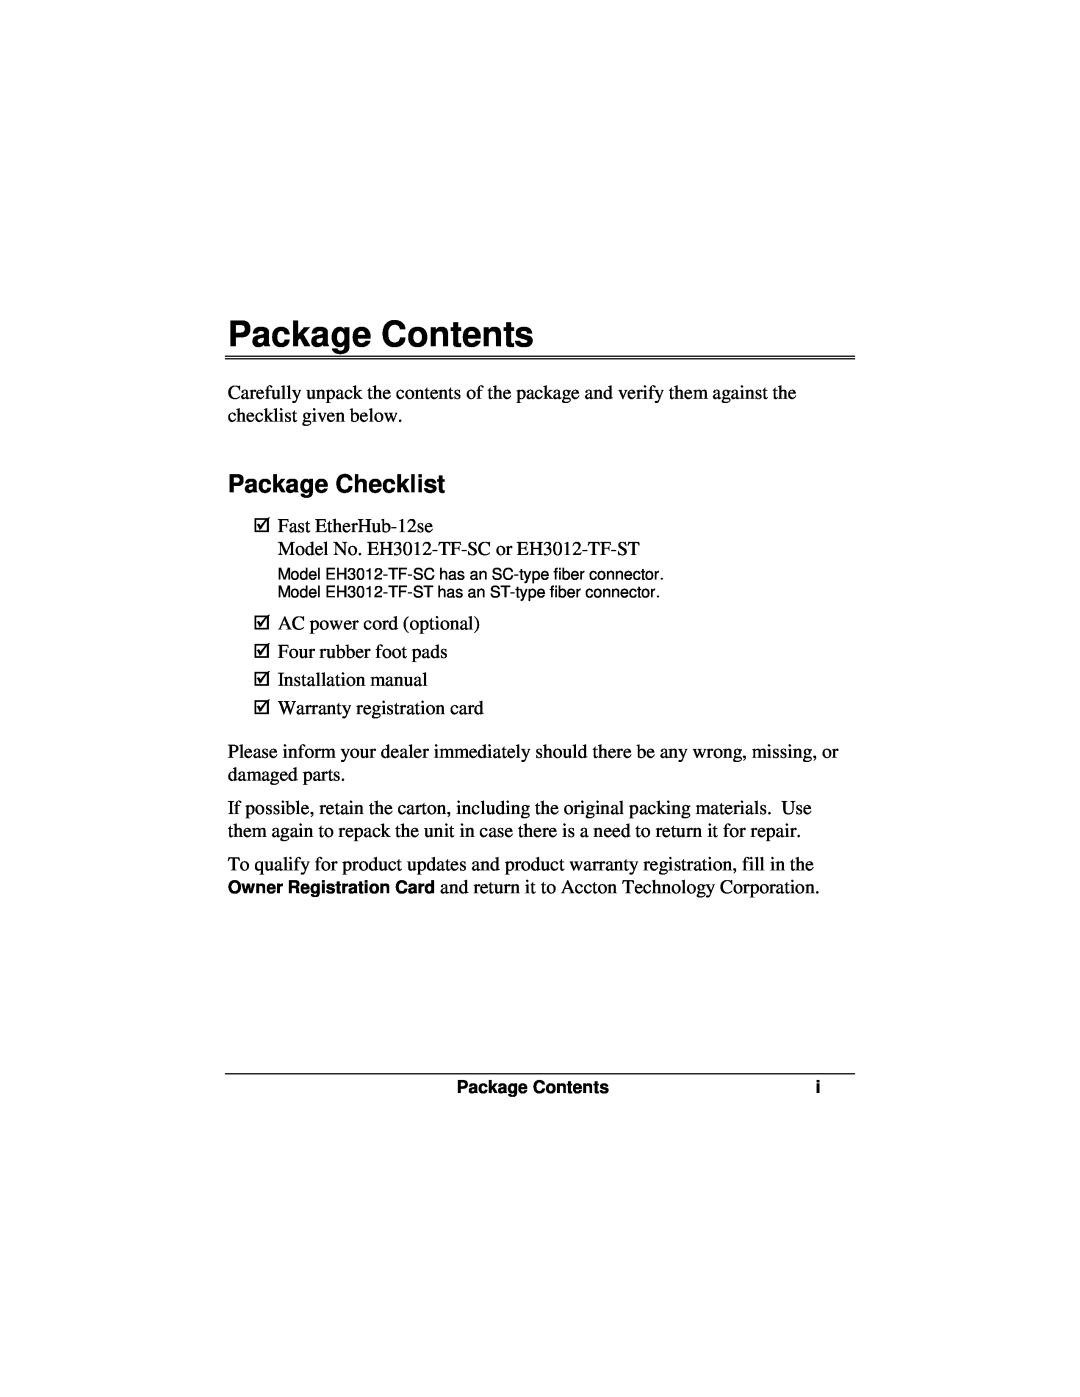 Accton Technology 12se manual Package Contents, Package Checklist 